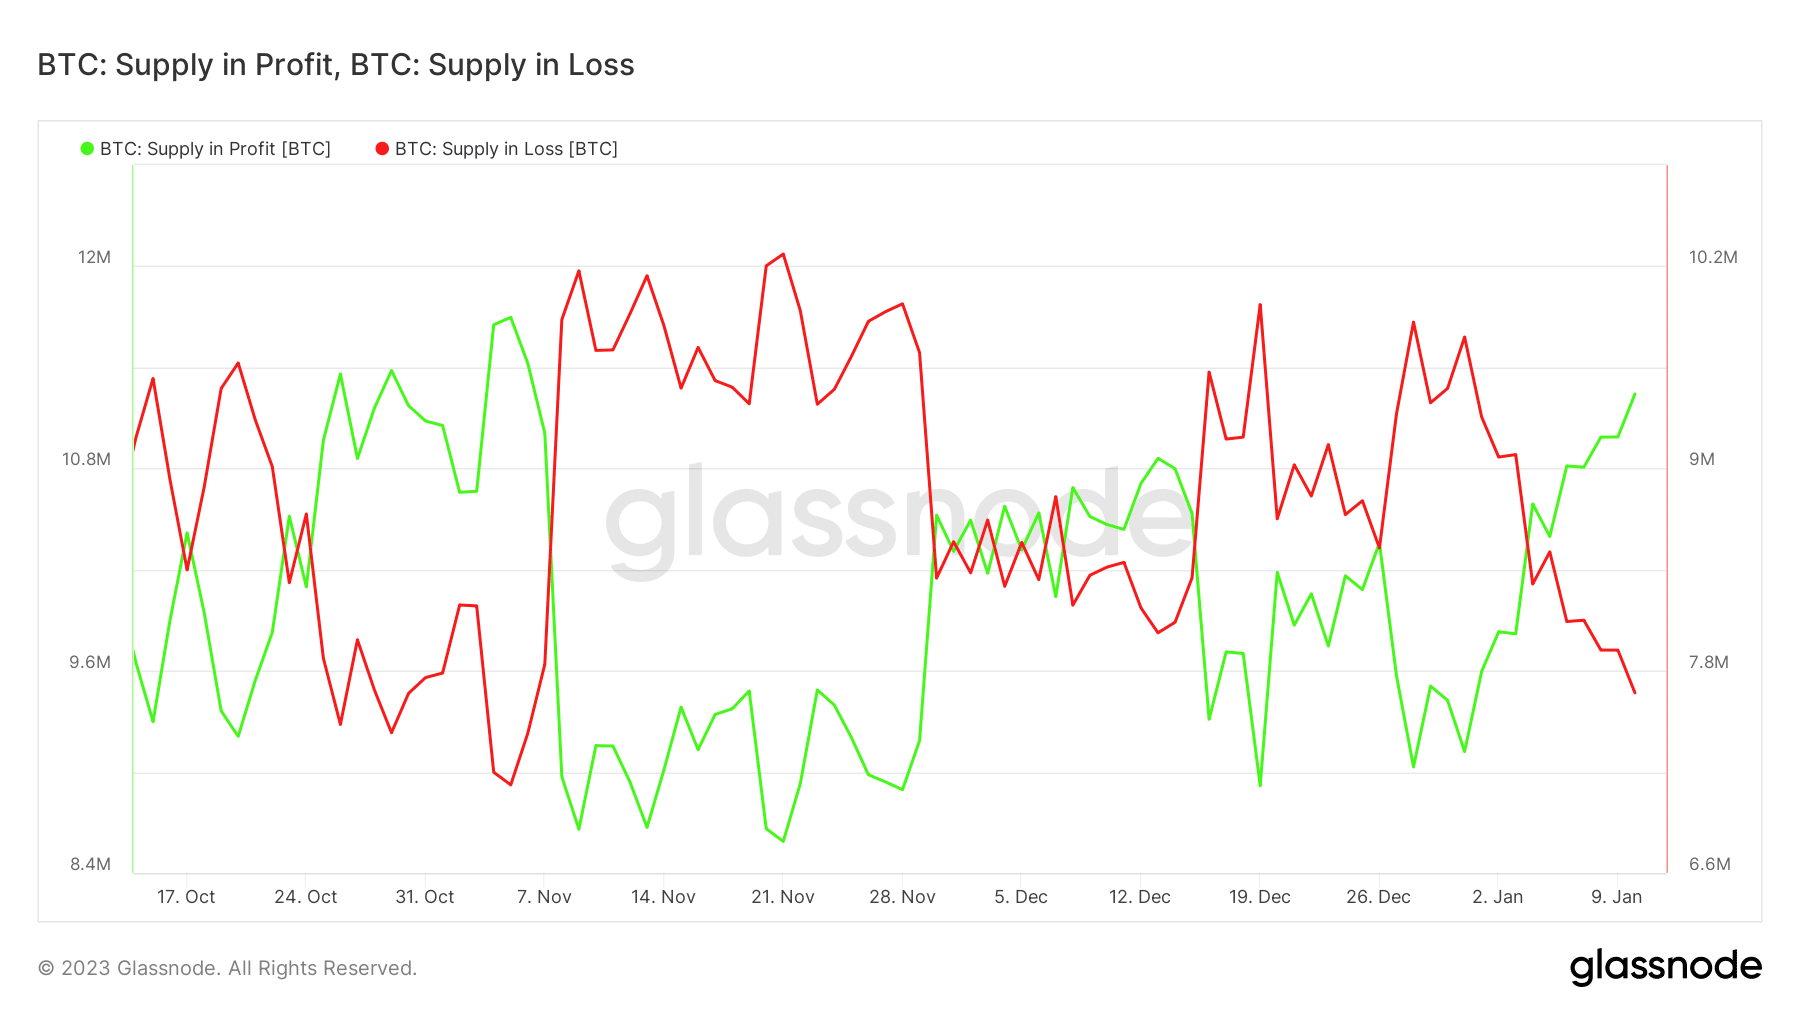 Bitcoin supply in profit and in loss